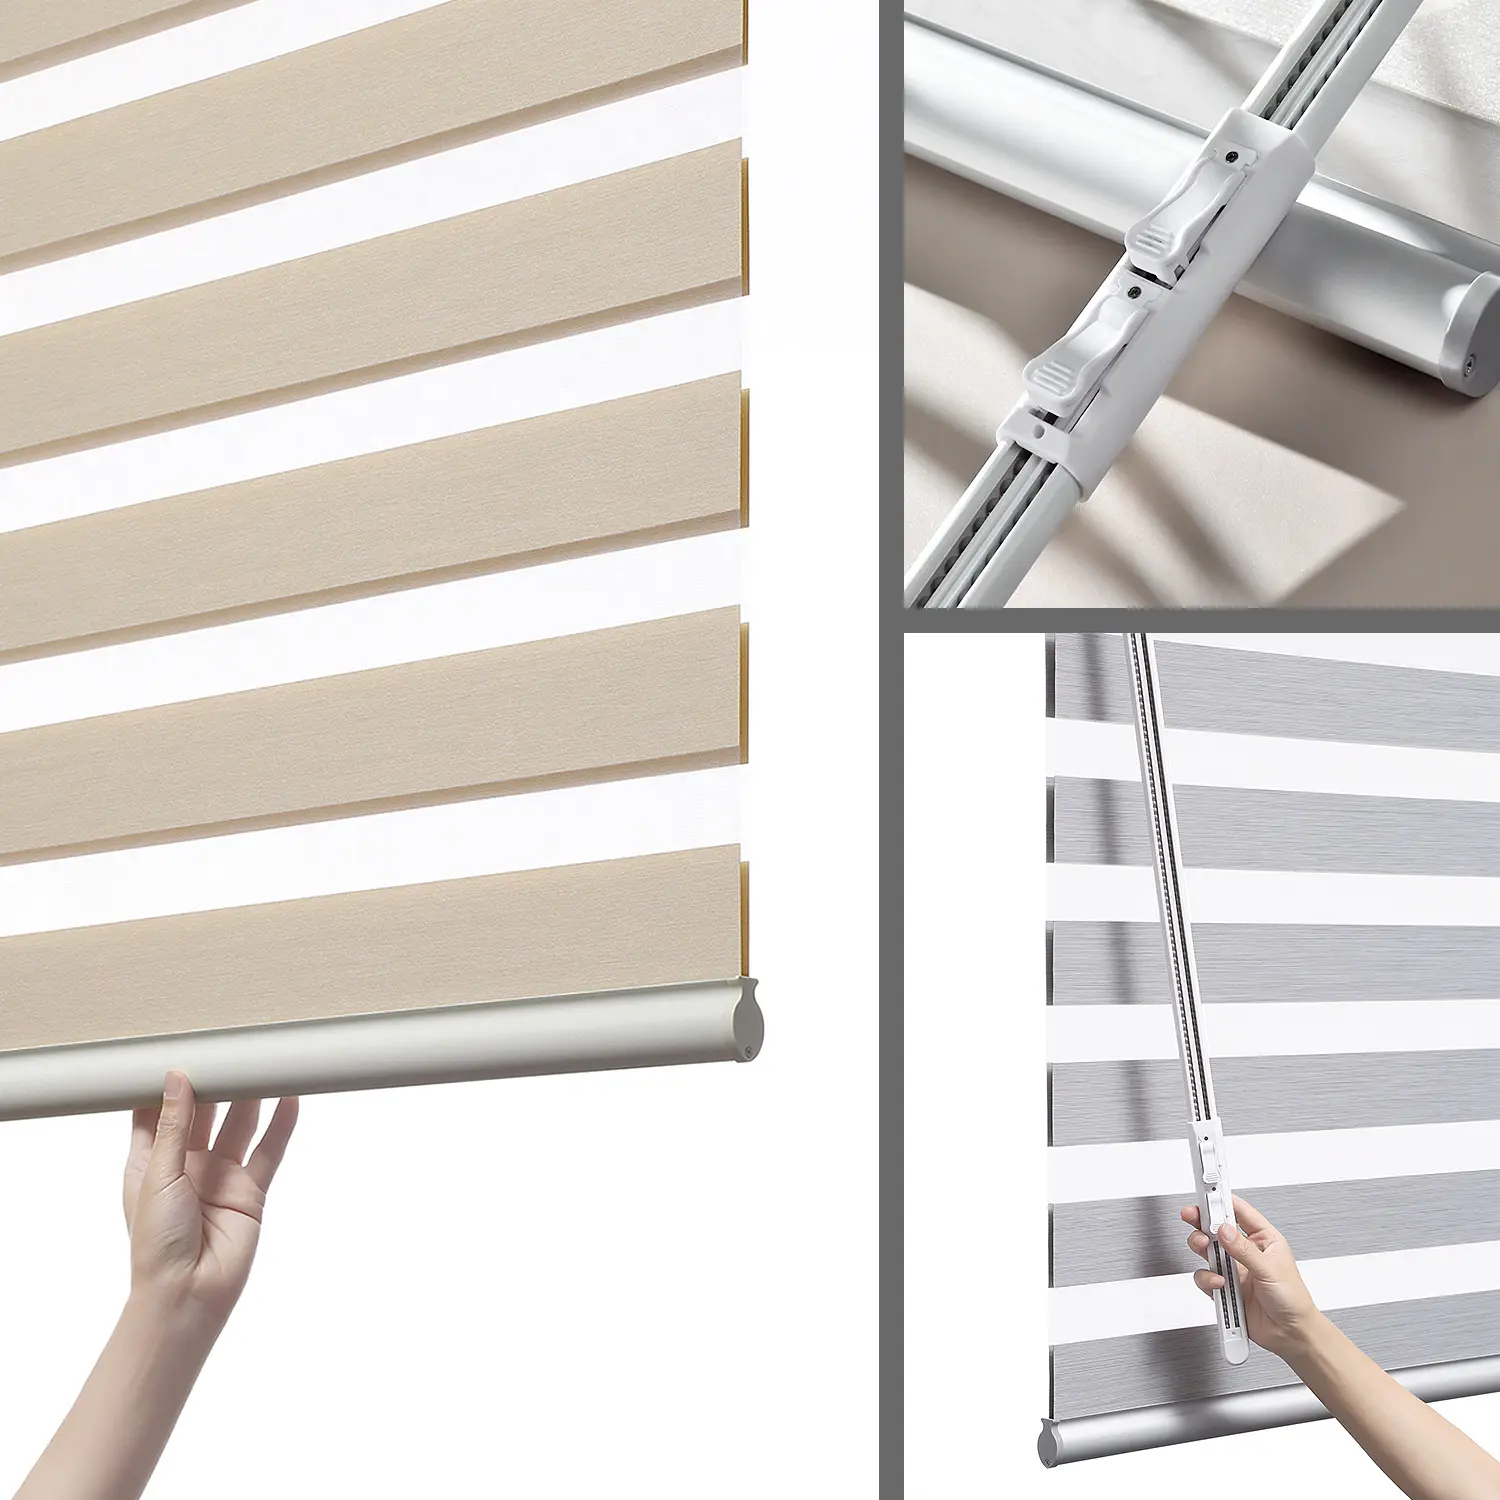 High Quality Window Blind Manual Control Waterproof Fabric motorized Shades Zebra Blinds For Windows